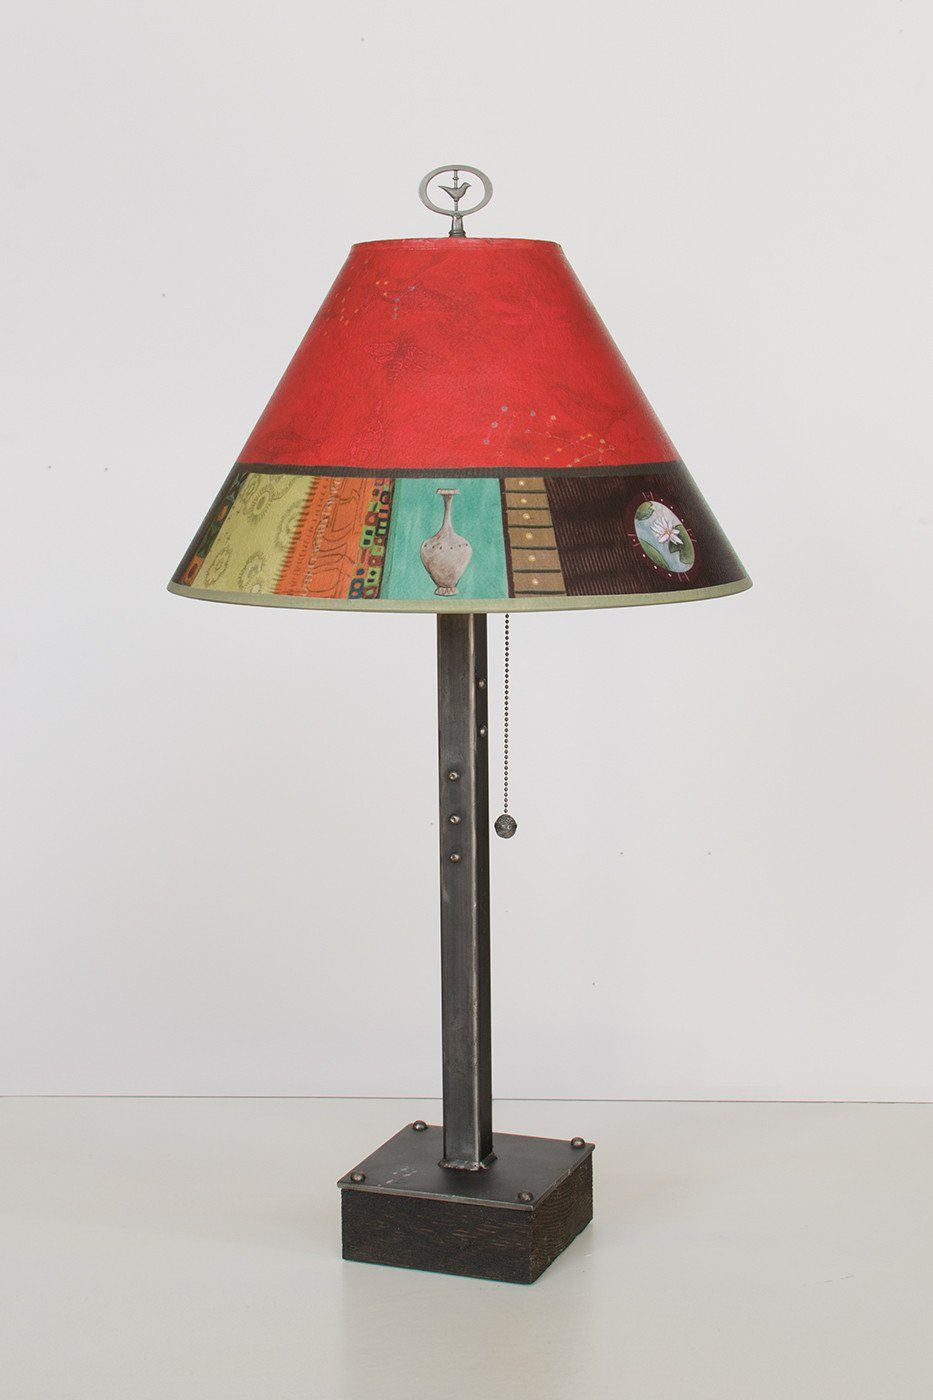 Steel Table Lamp on Wood with Medium Conical Shade in Red Match - Lit